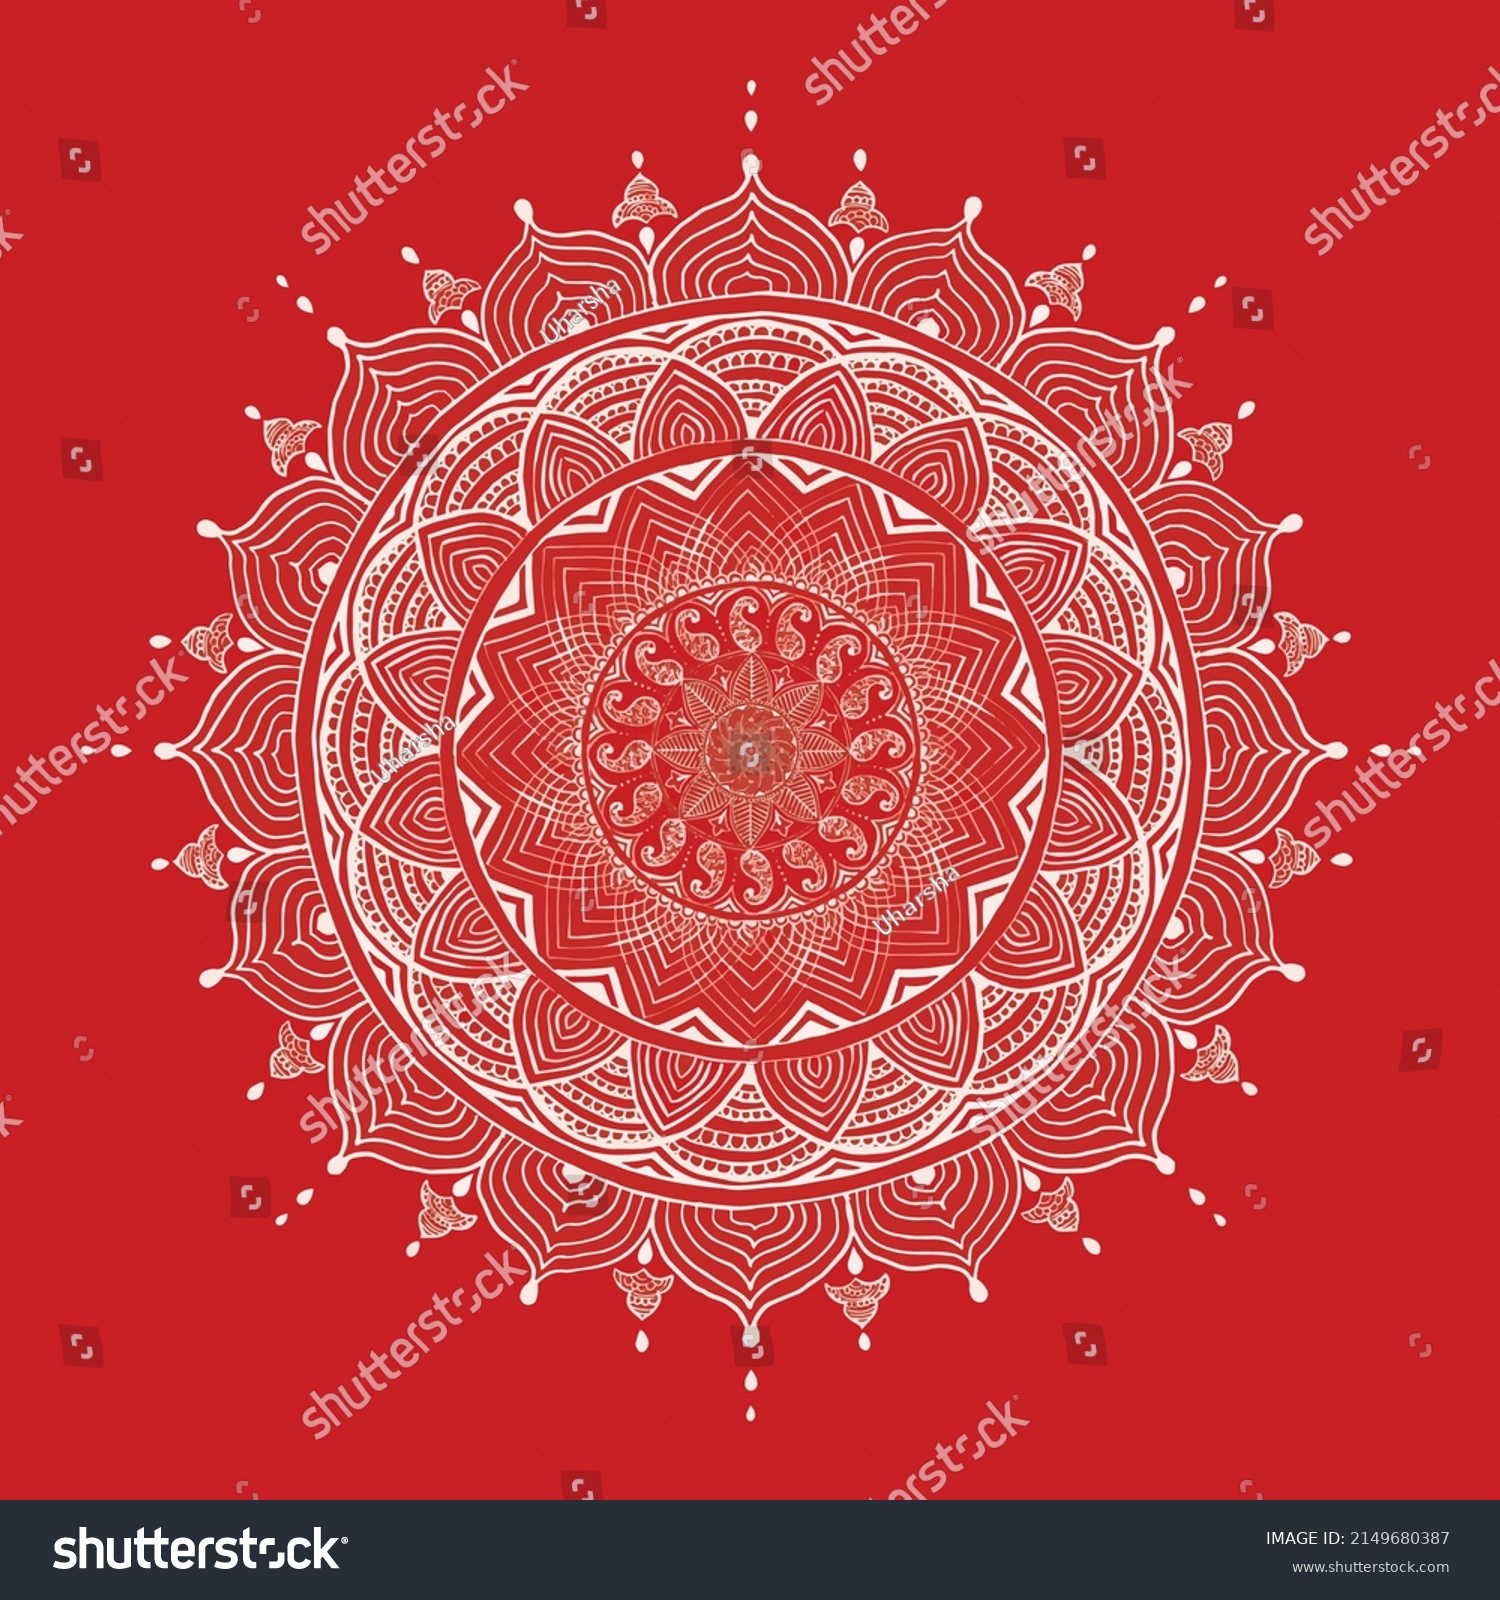 SVG of Aipan Design pattern for India festival vector red and white color svg